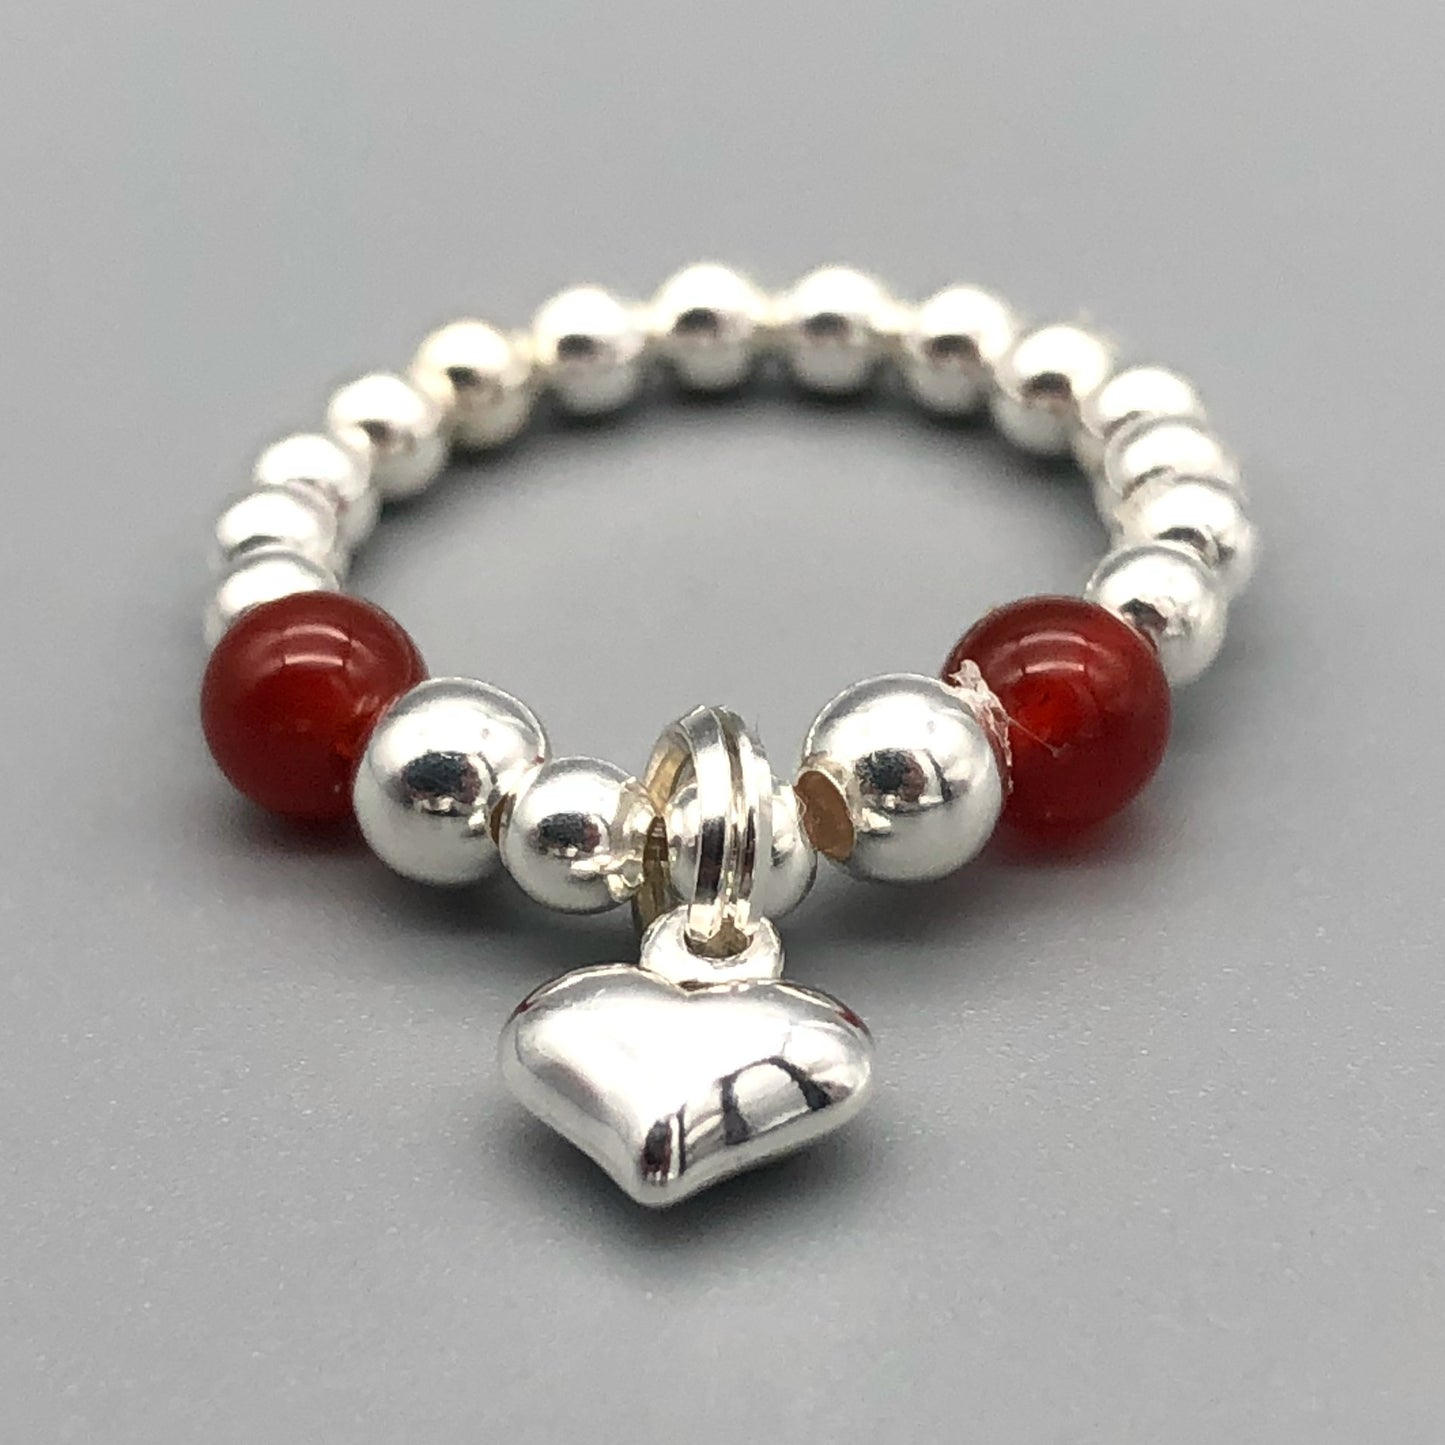 Heart charm sterling silver & carnelian bead girl's stacking charm ring by My Silver Wish